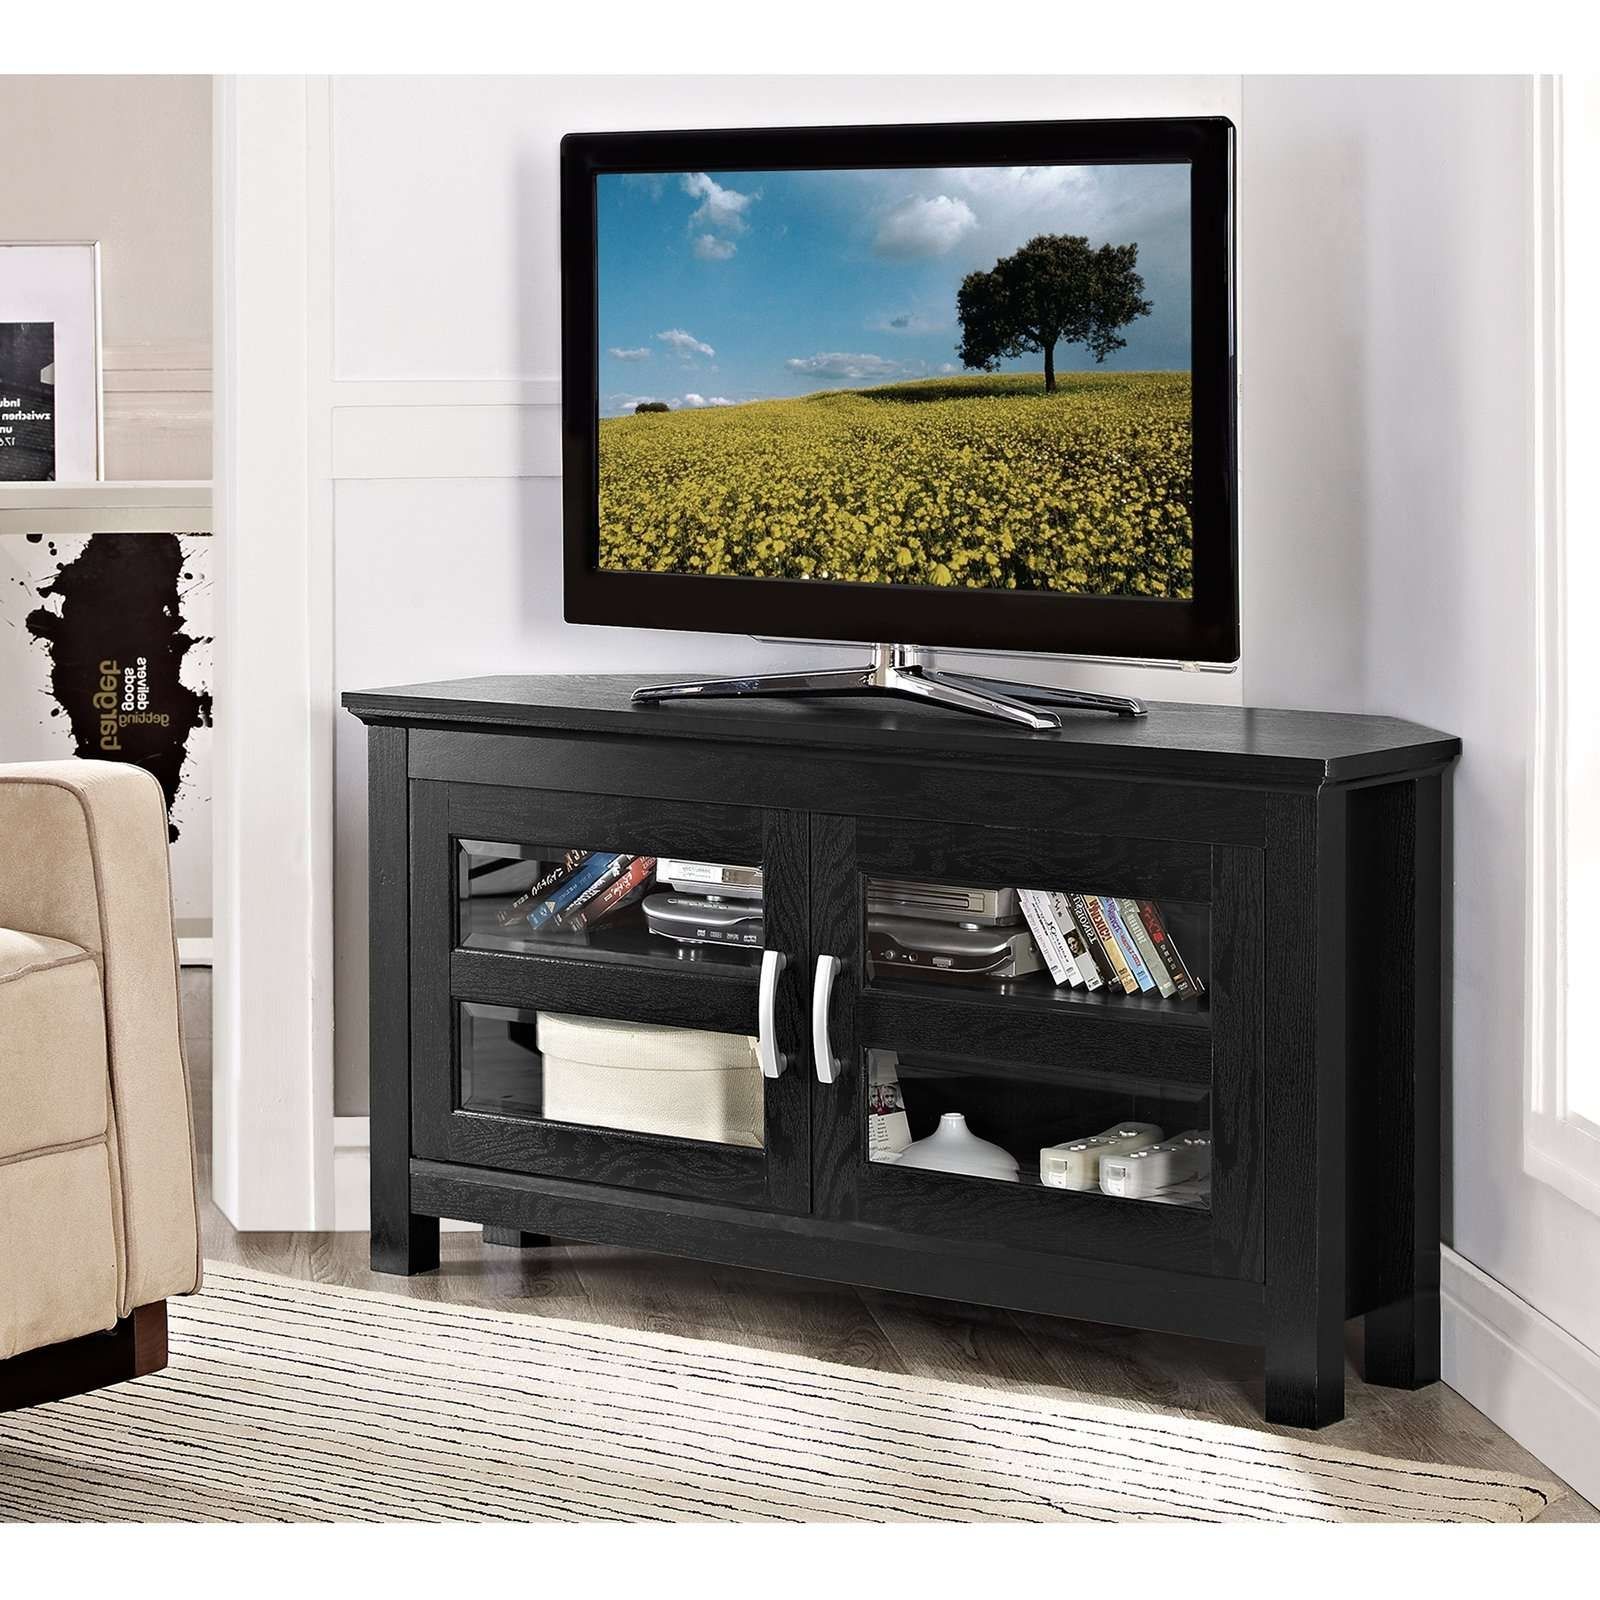 Furniture. Wonderful Design Of Wooden Tv Stands With Mount To With Silver Corner Tv Stands (Gallery 4 of 15)